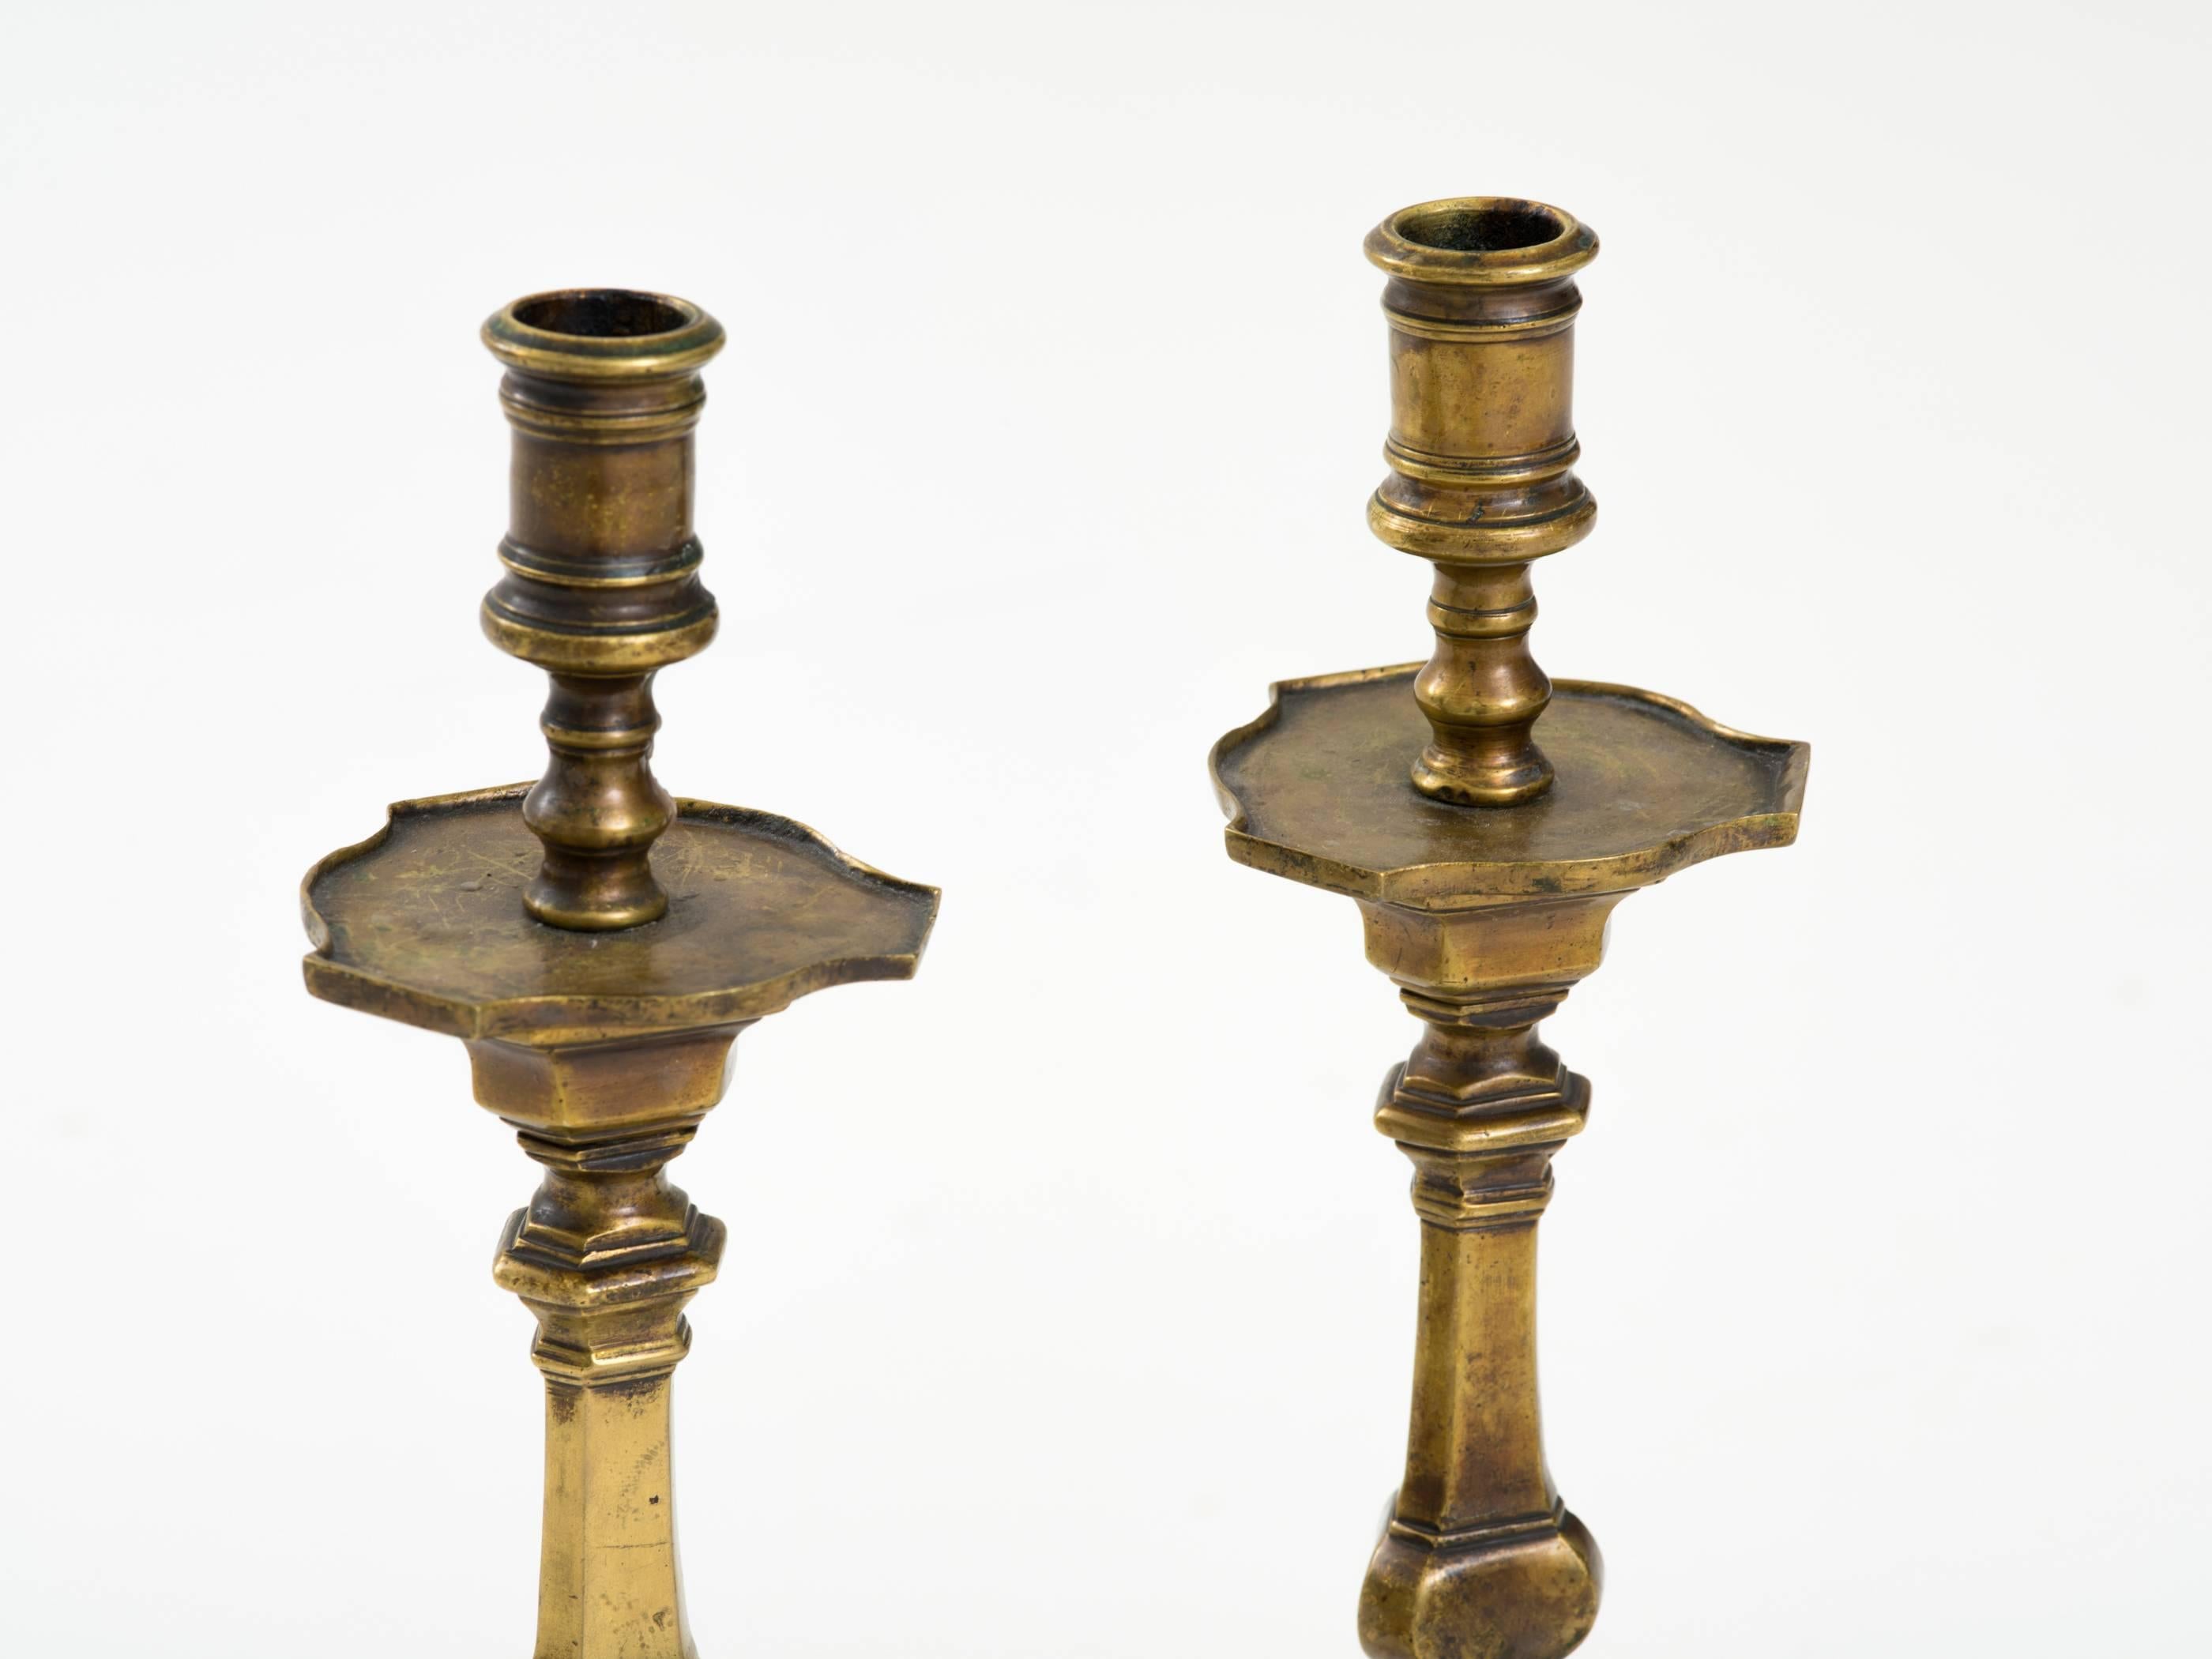 Pair of 18th century Spanish patinated bronze candlesticks on Baroque tripod bases.